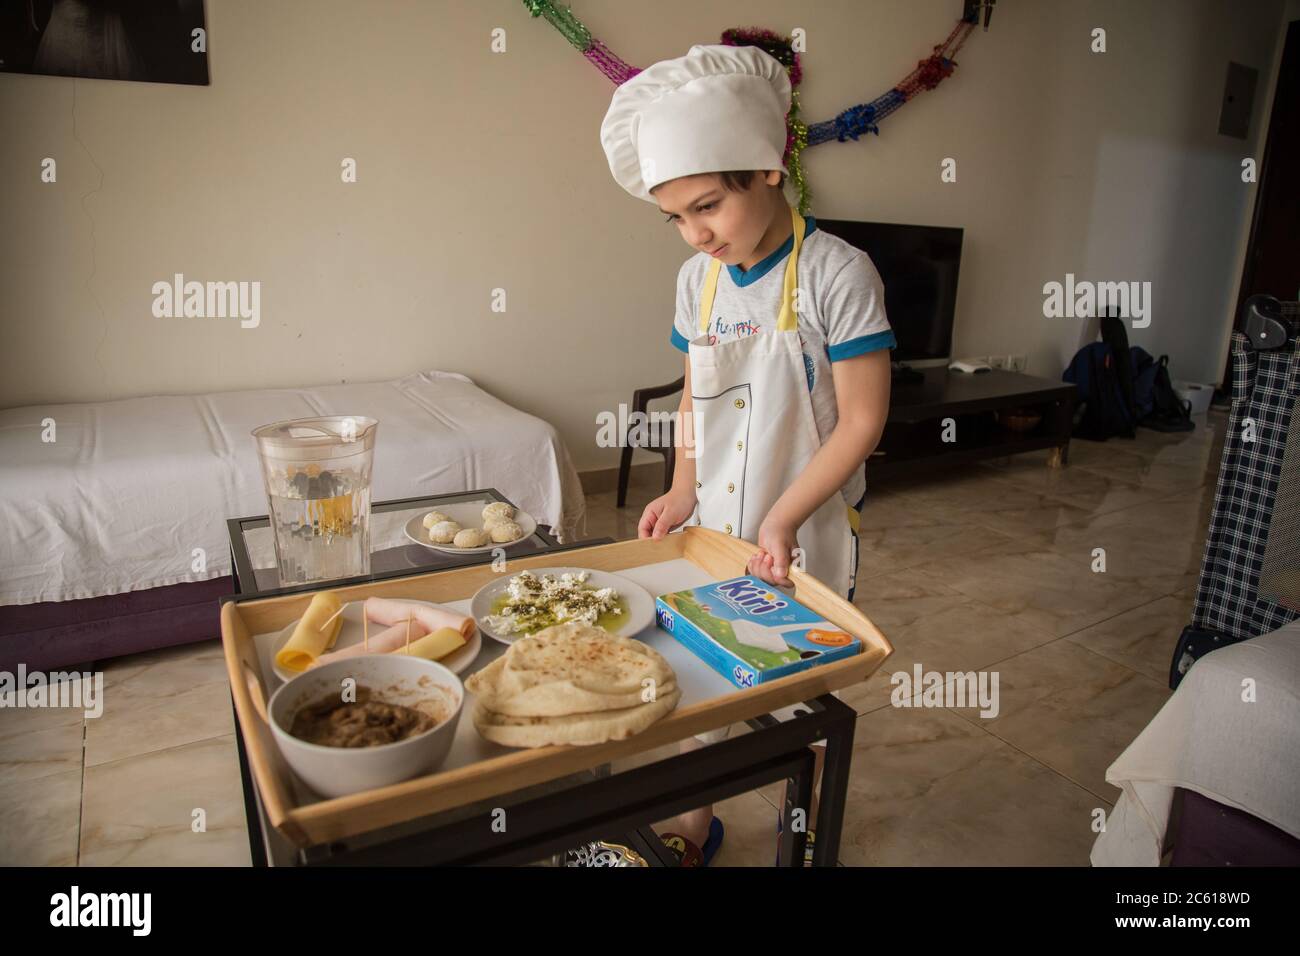 Cairo, Egypt. 17th June, 2020. Malek wears chef costume while helping his mother preparing breakfast. For more than three months schools, sports clubs, amusement parks and gardens have been closed due to the coronavirus pandemic. The majority of children suddenly got stuck at home where they are trying to come up with activities to kill their time, however, they still have hopes that soon enough they can spend their leisure time in open spaces instead of home confinement. Credit: Lobna Tarek/dpa/Alamy Live News Stock Photo